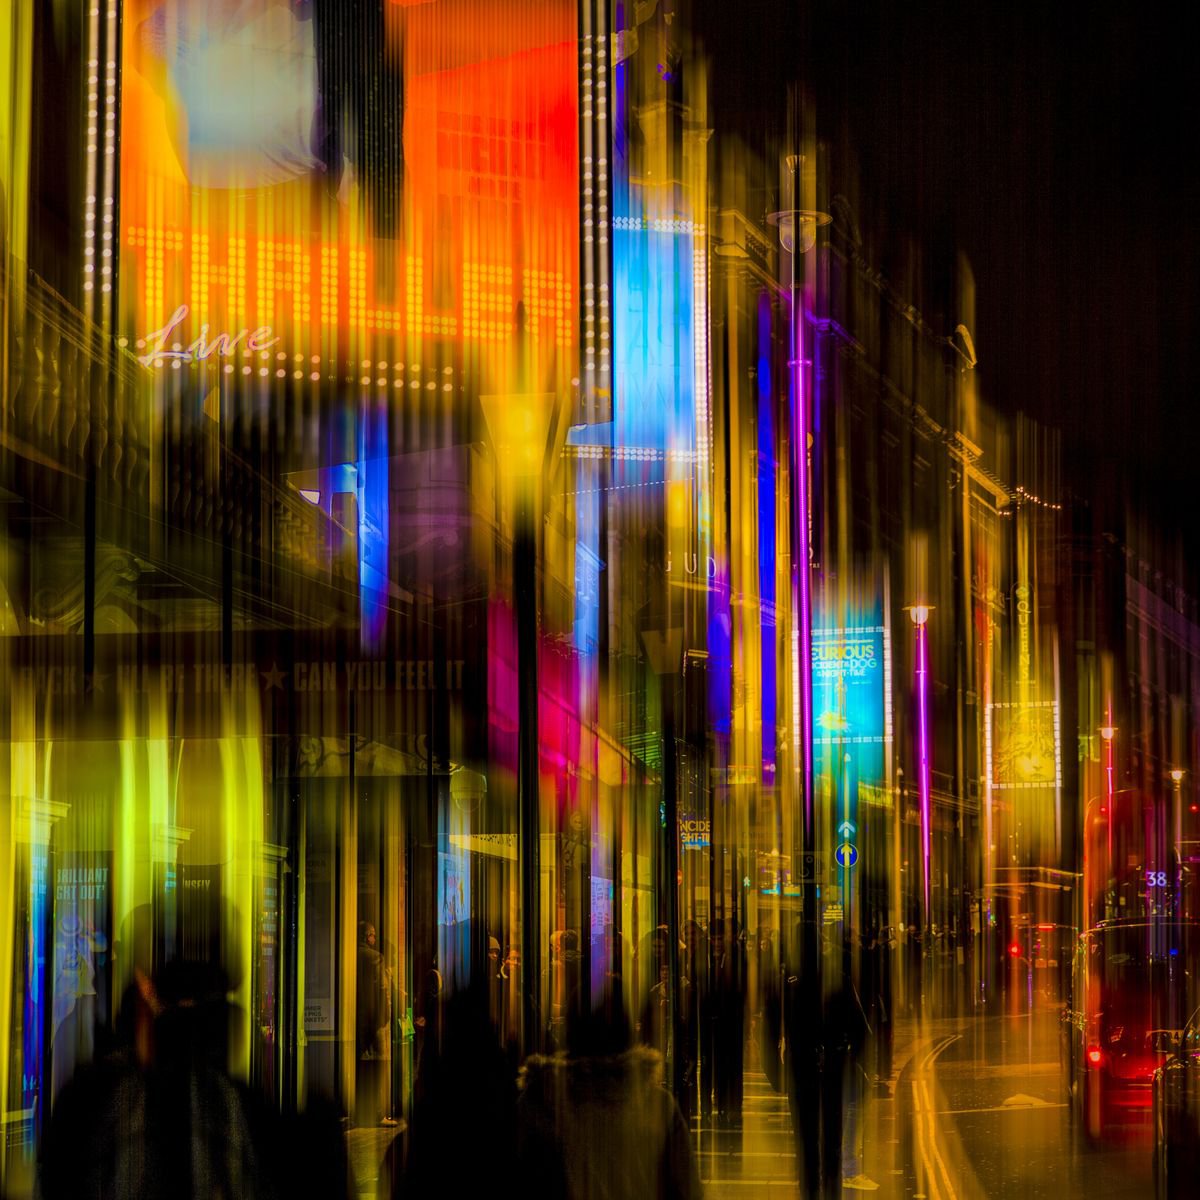 Abstract London: Theatreland by Graham Briggs